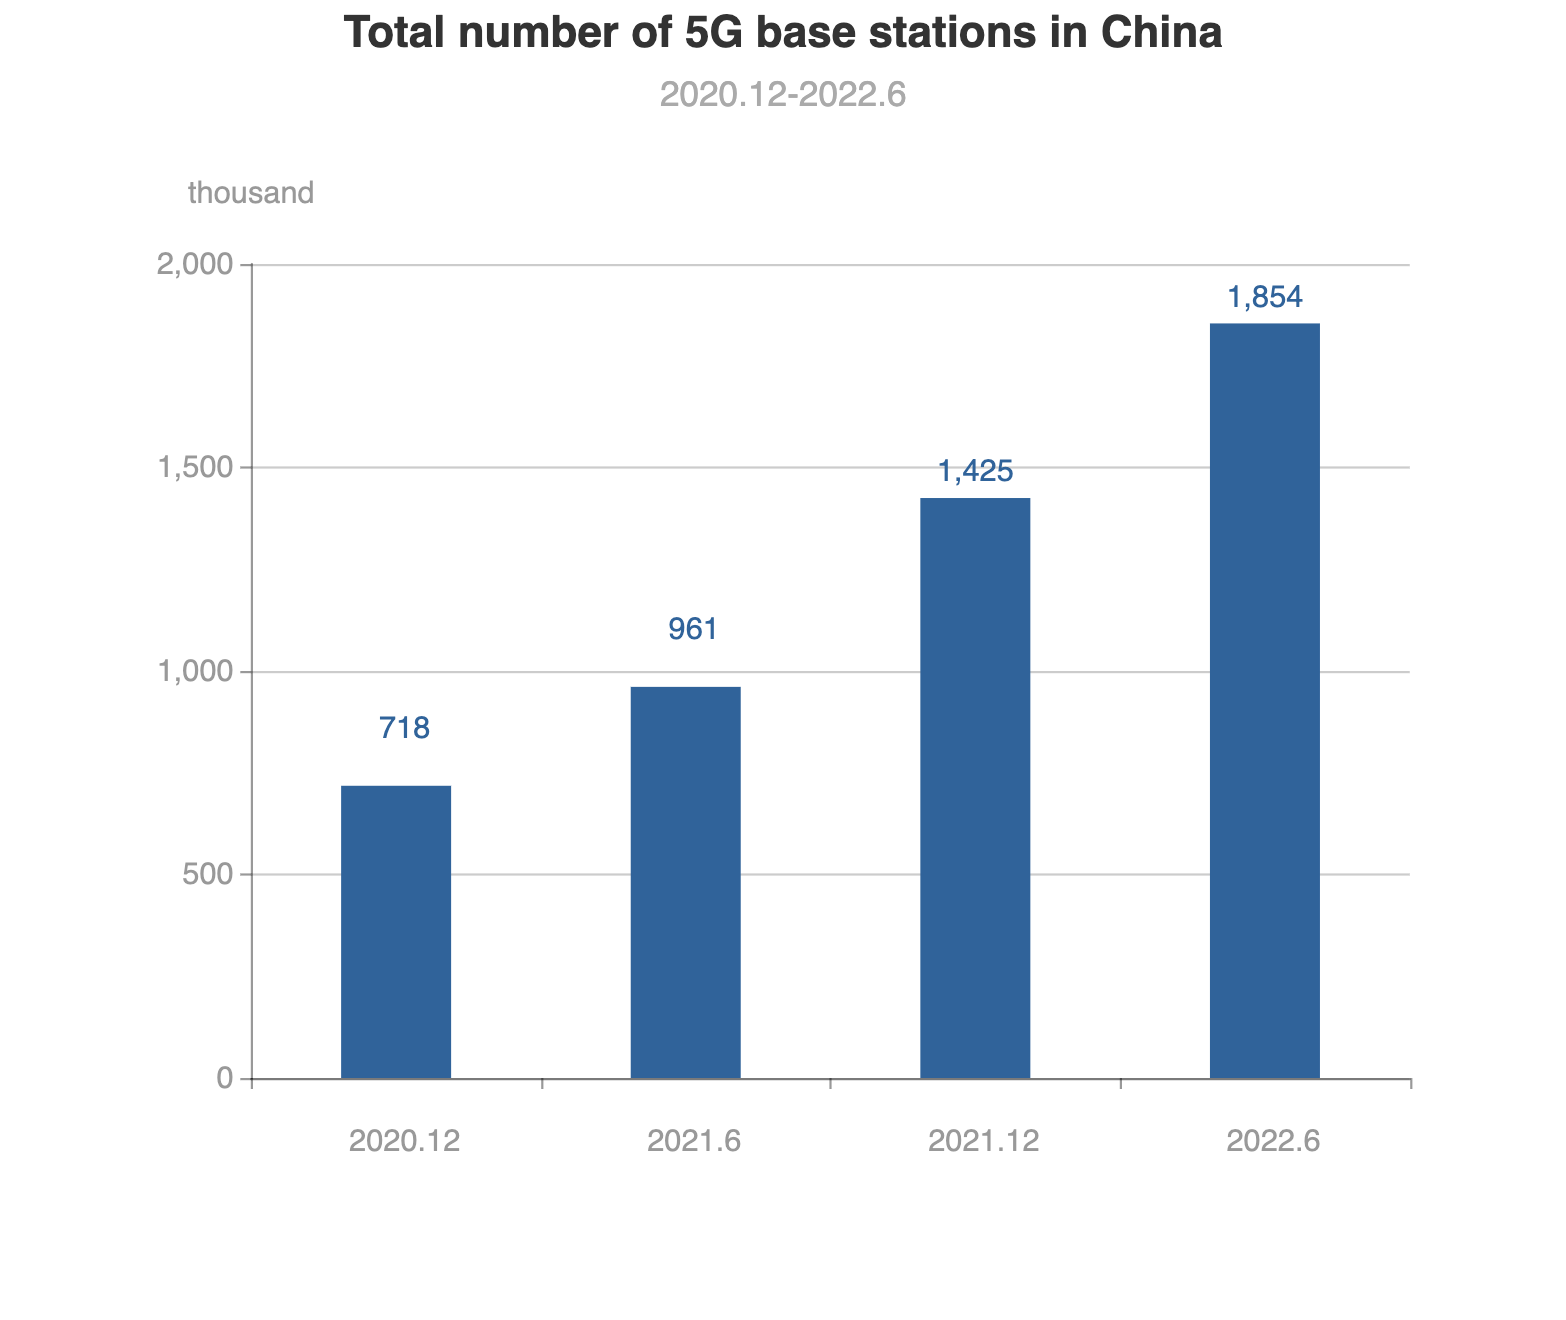 Source: China's Ministry of Industry and Information Technology